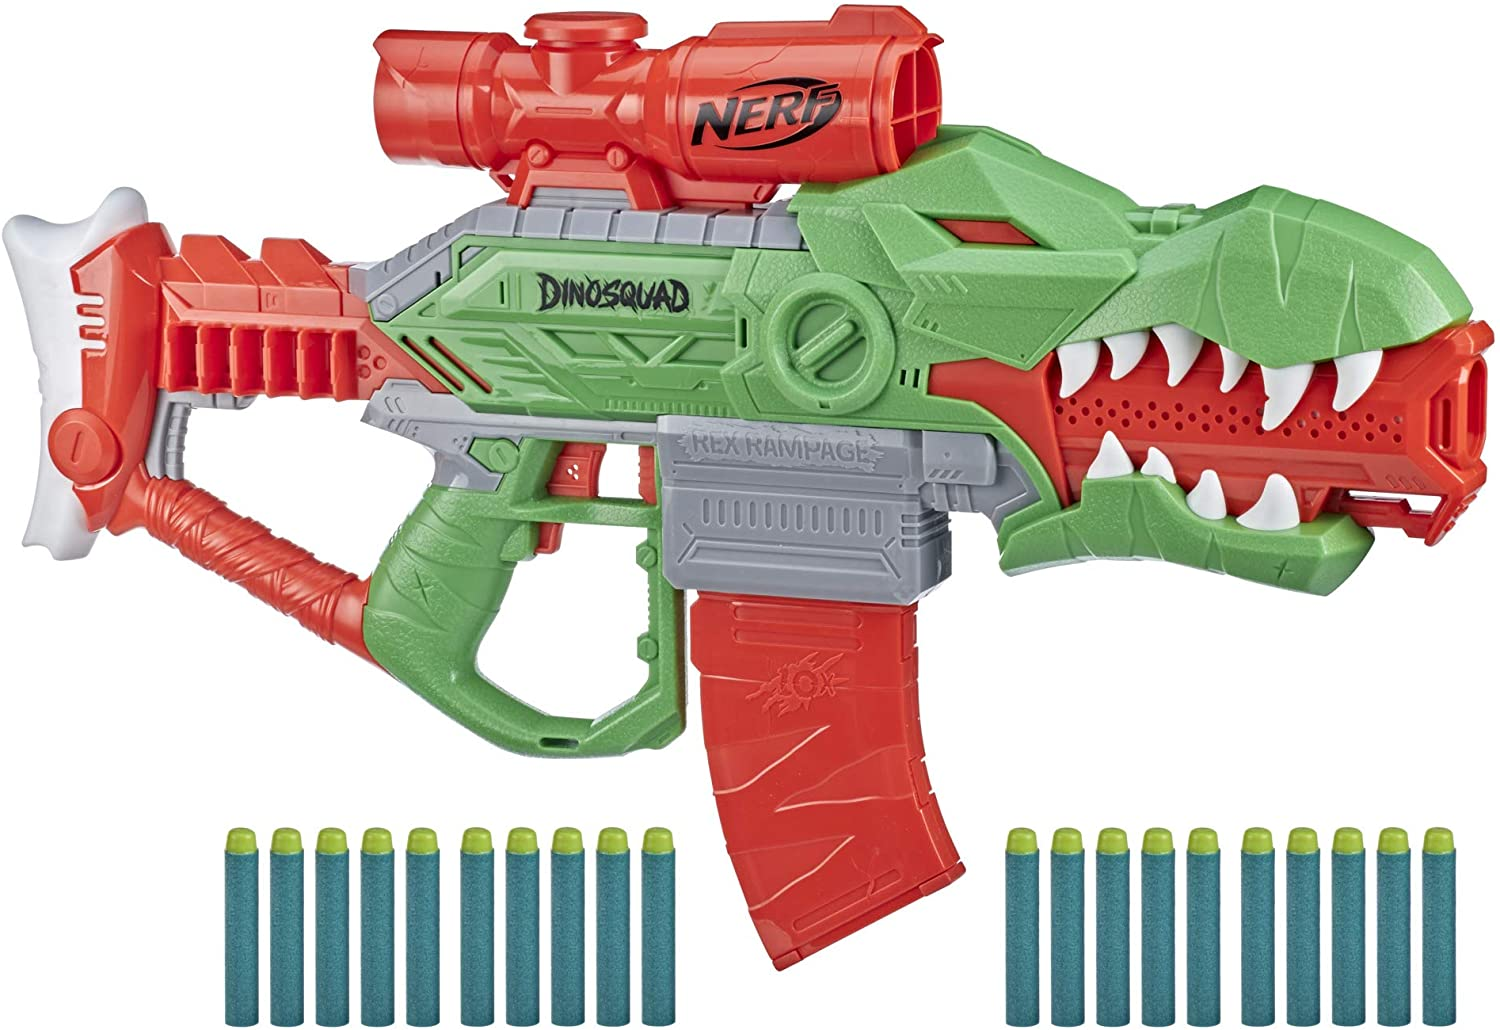 10 Cheap Nerf Guns are Tons of Fun The Real Deal by